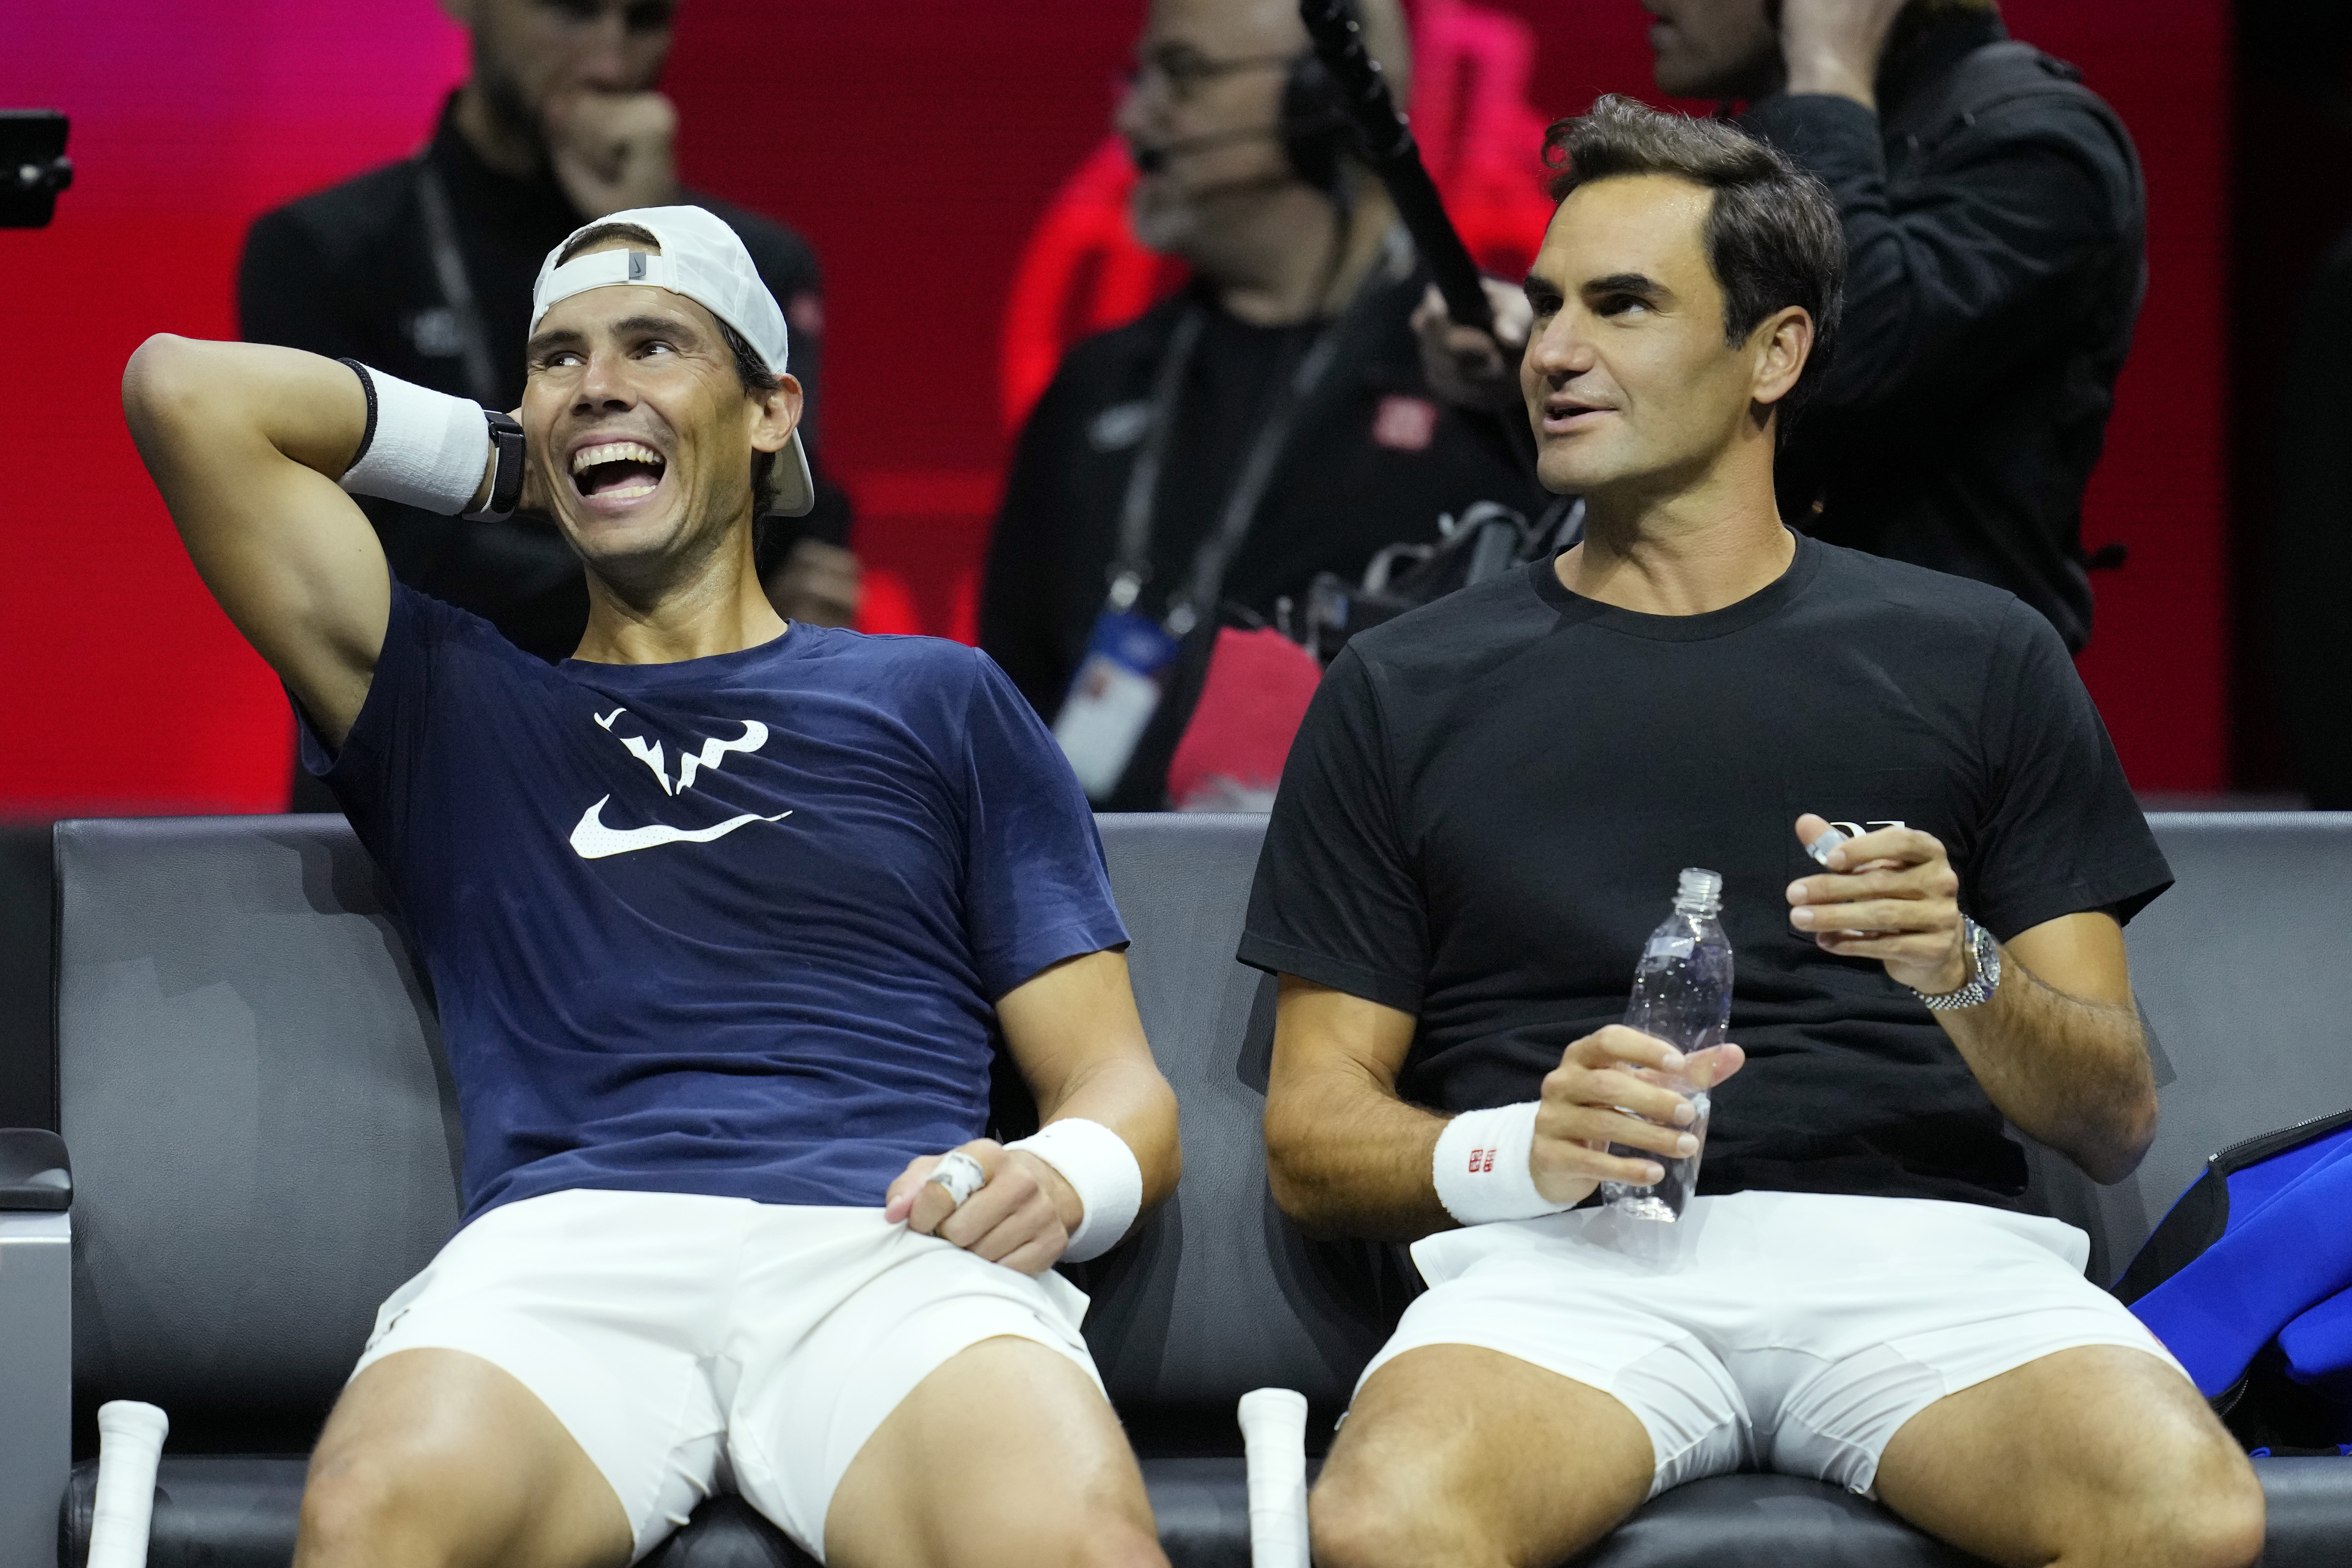 Roger Federers final match at the Laver Cup Start time, TV info, live stream for his doubles match with Rafael Nadal